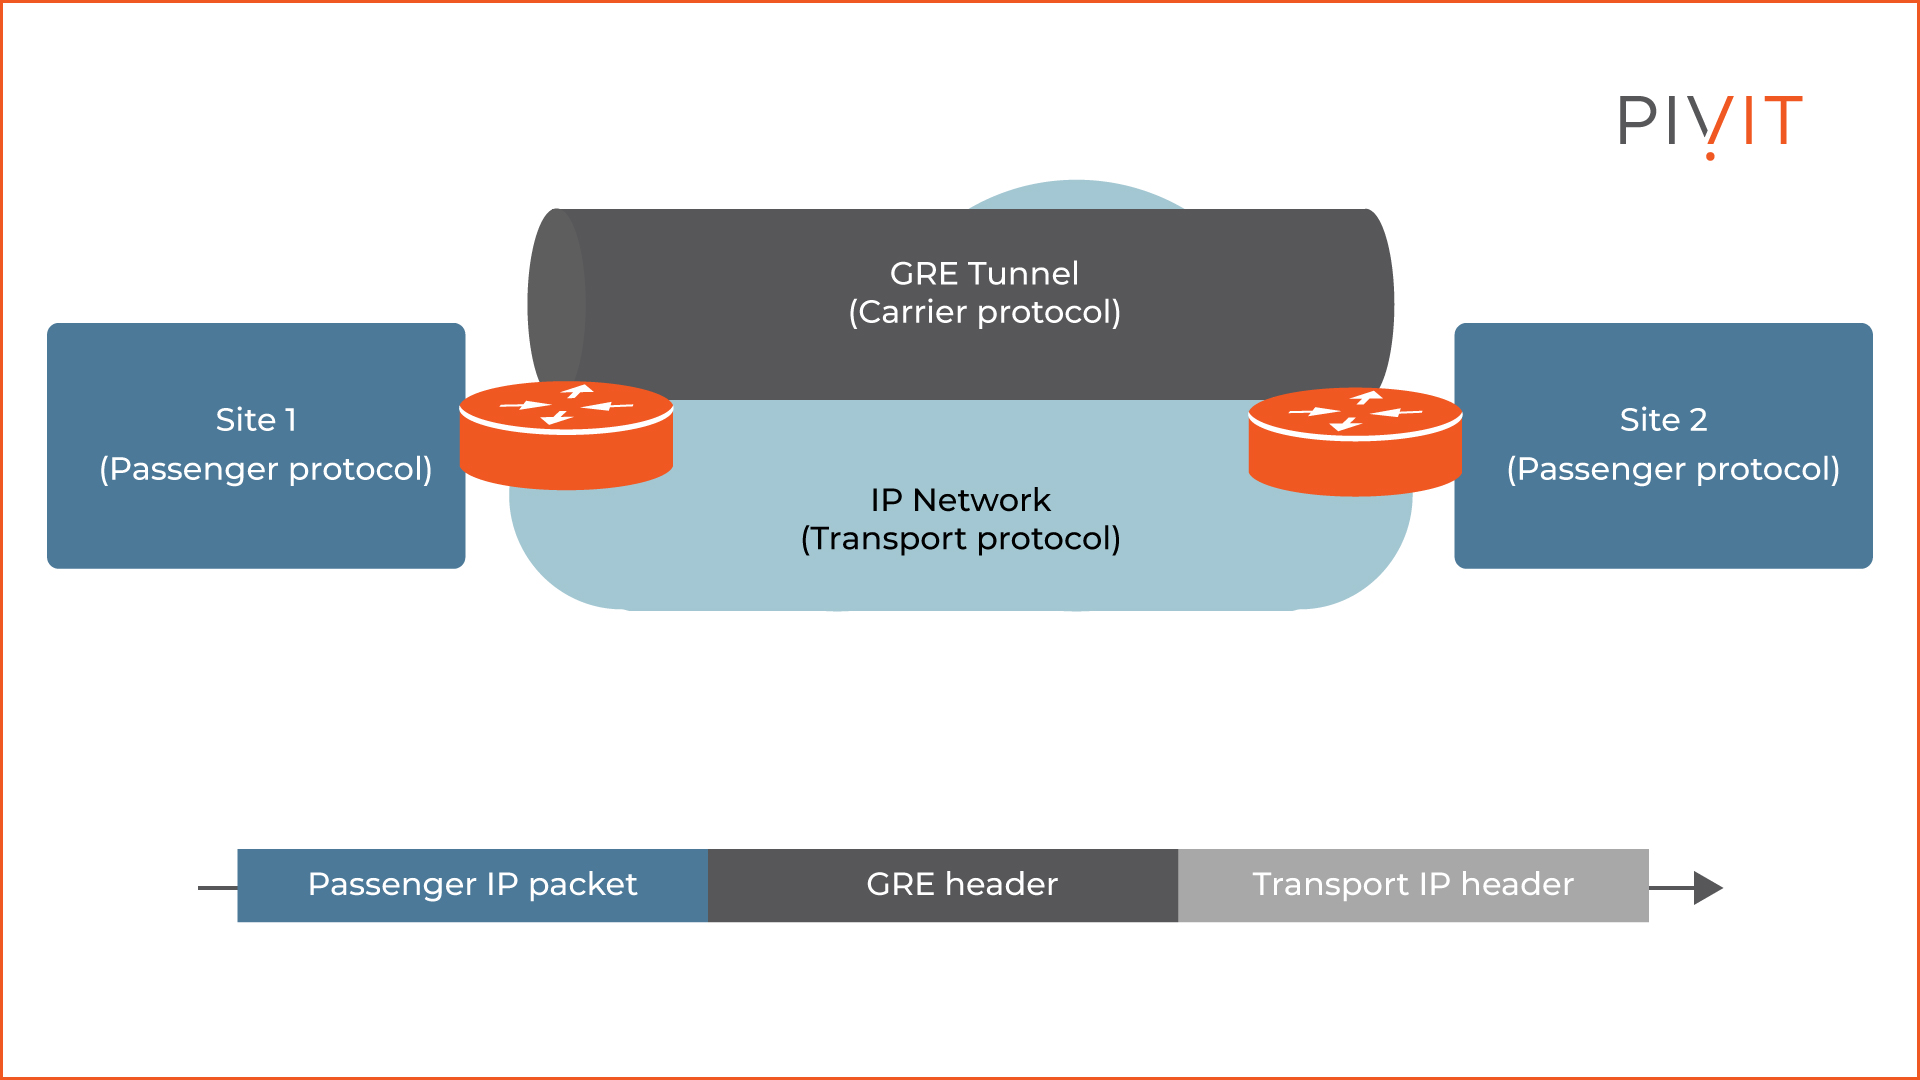 GRE tunnel (carrier protocol) - two sites (passenger protocol) that need to exchange data over the internet